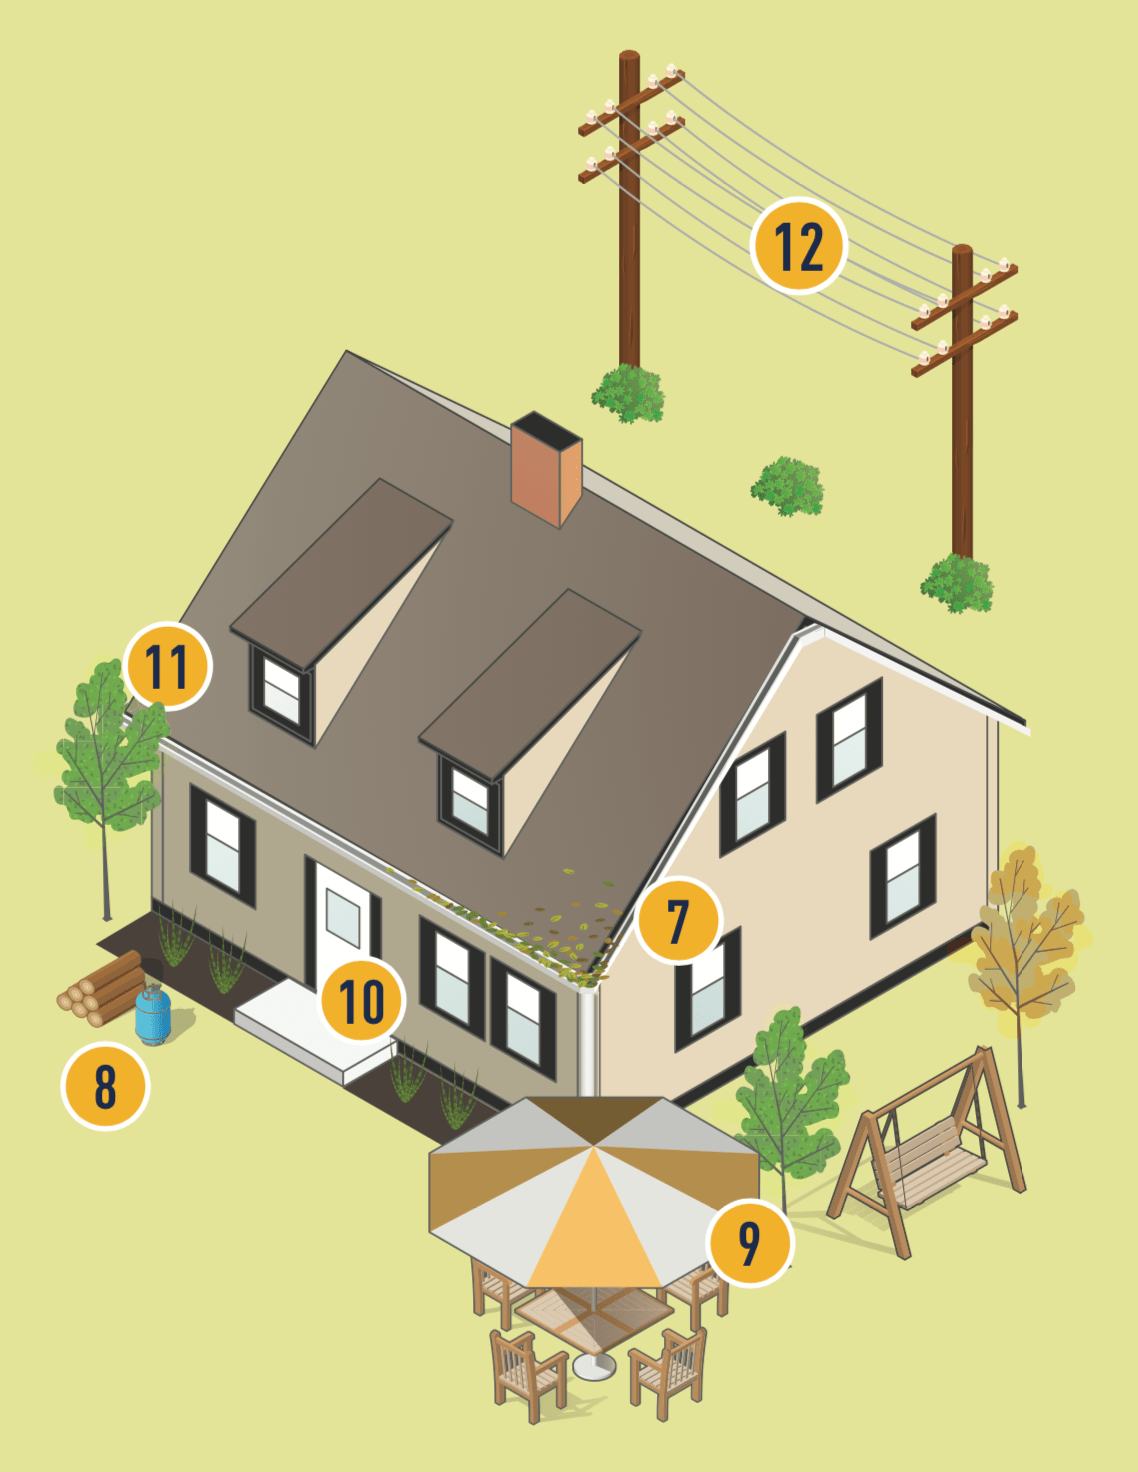 Illustration of a home with key defensible spaces to protect in case of a wildfire marked with numbers